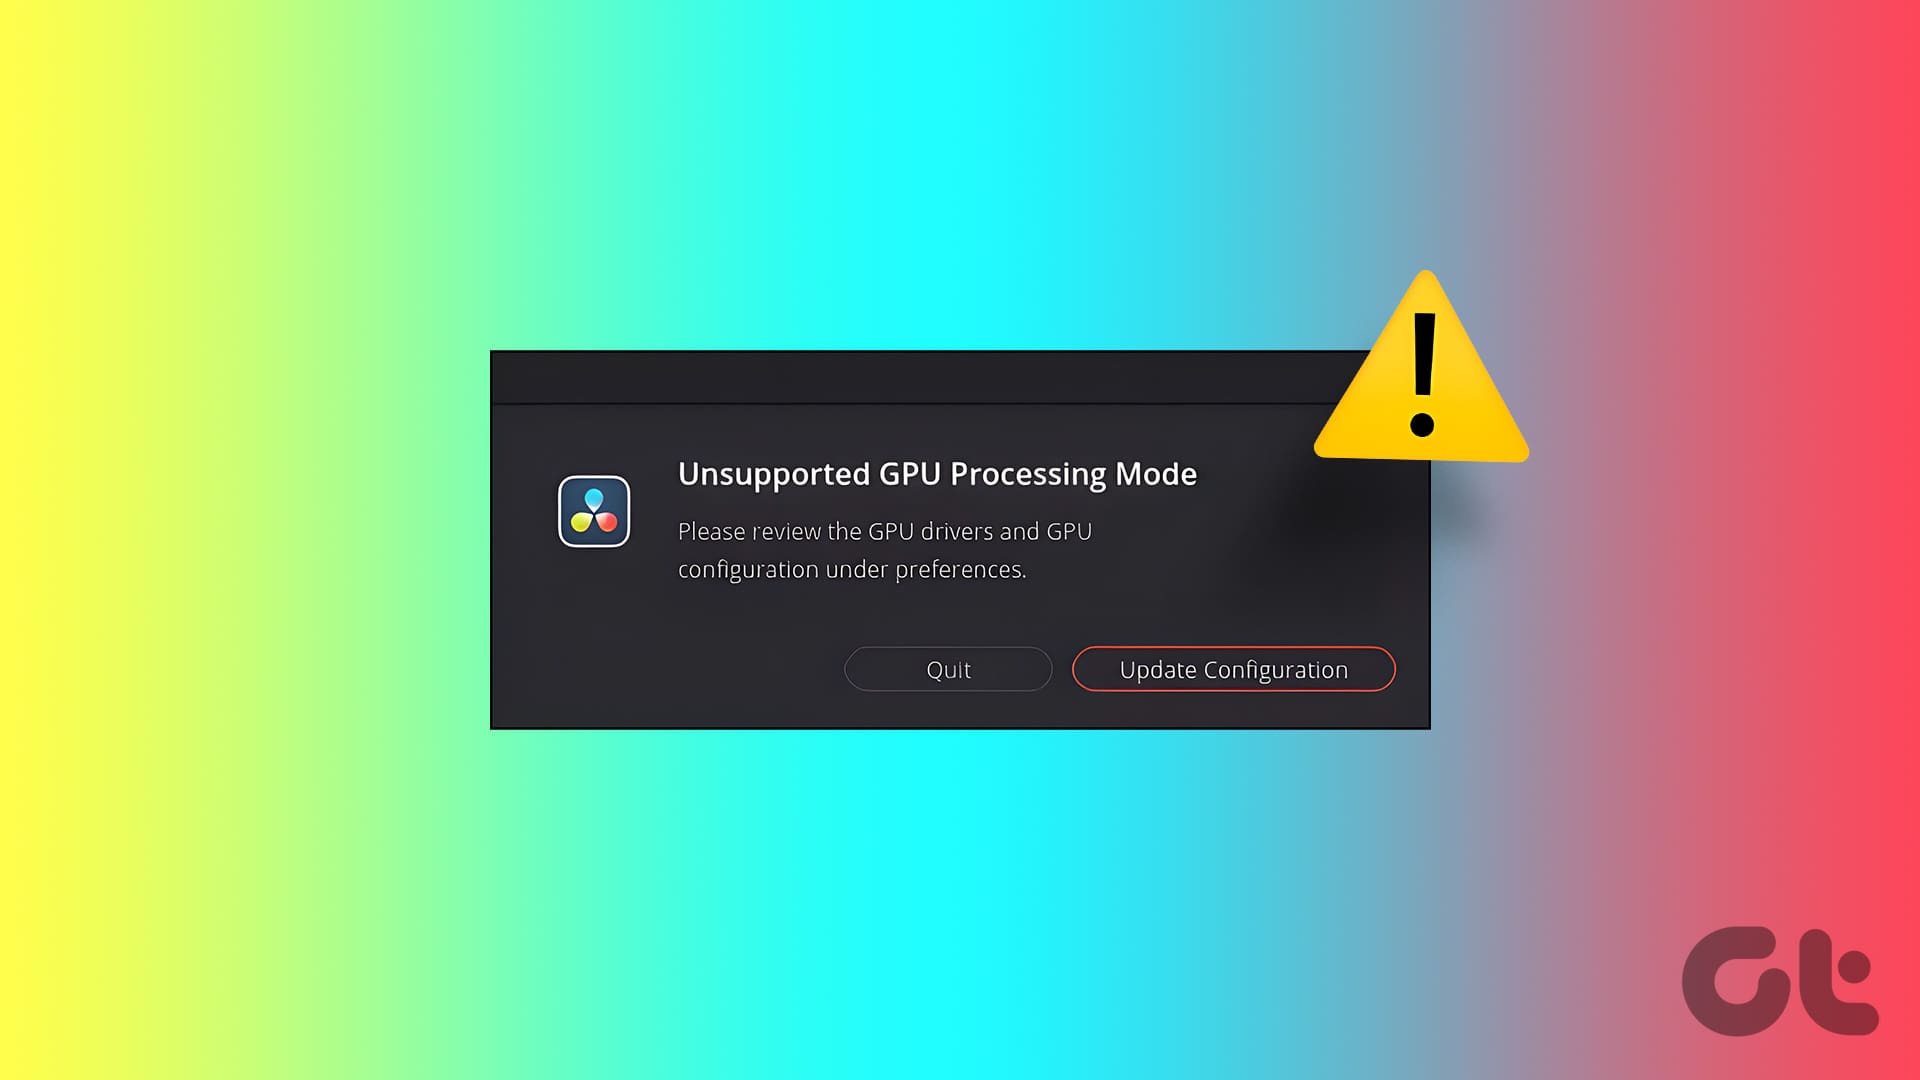 How to Fix DaVinci Resolve Unsupported GPU Processing Mode on Windows